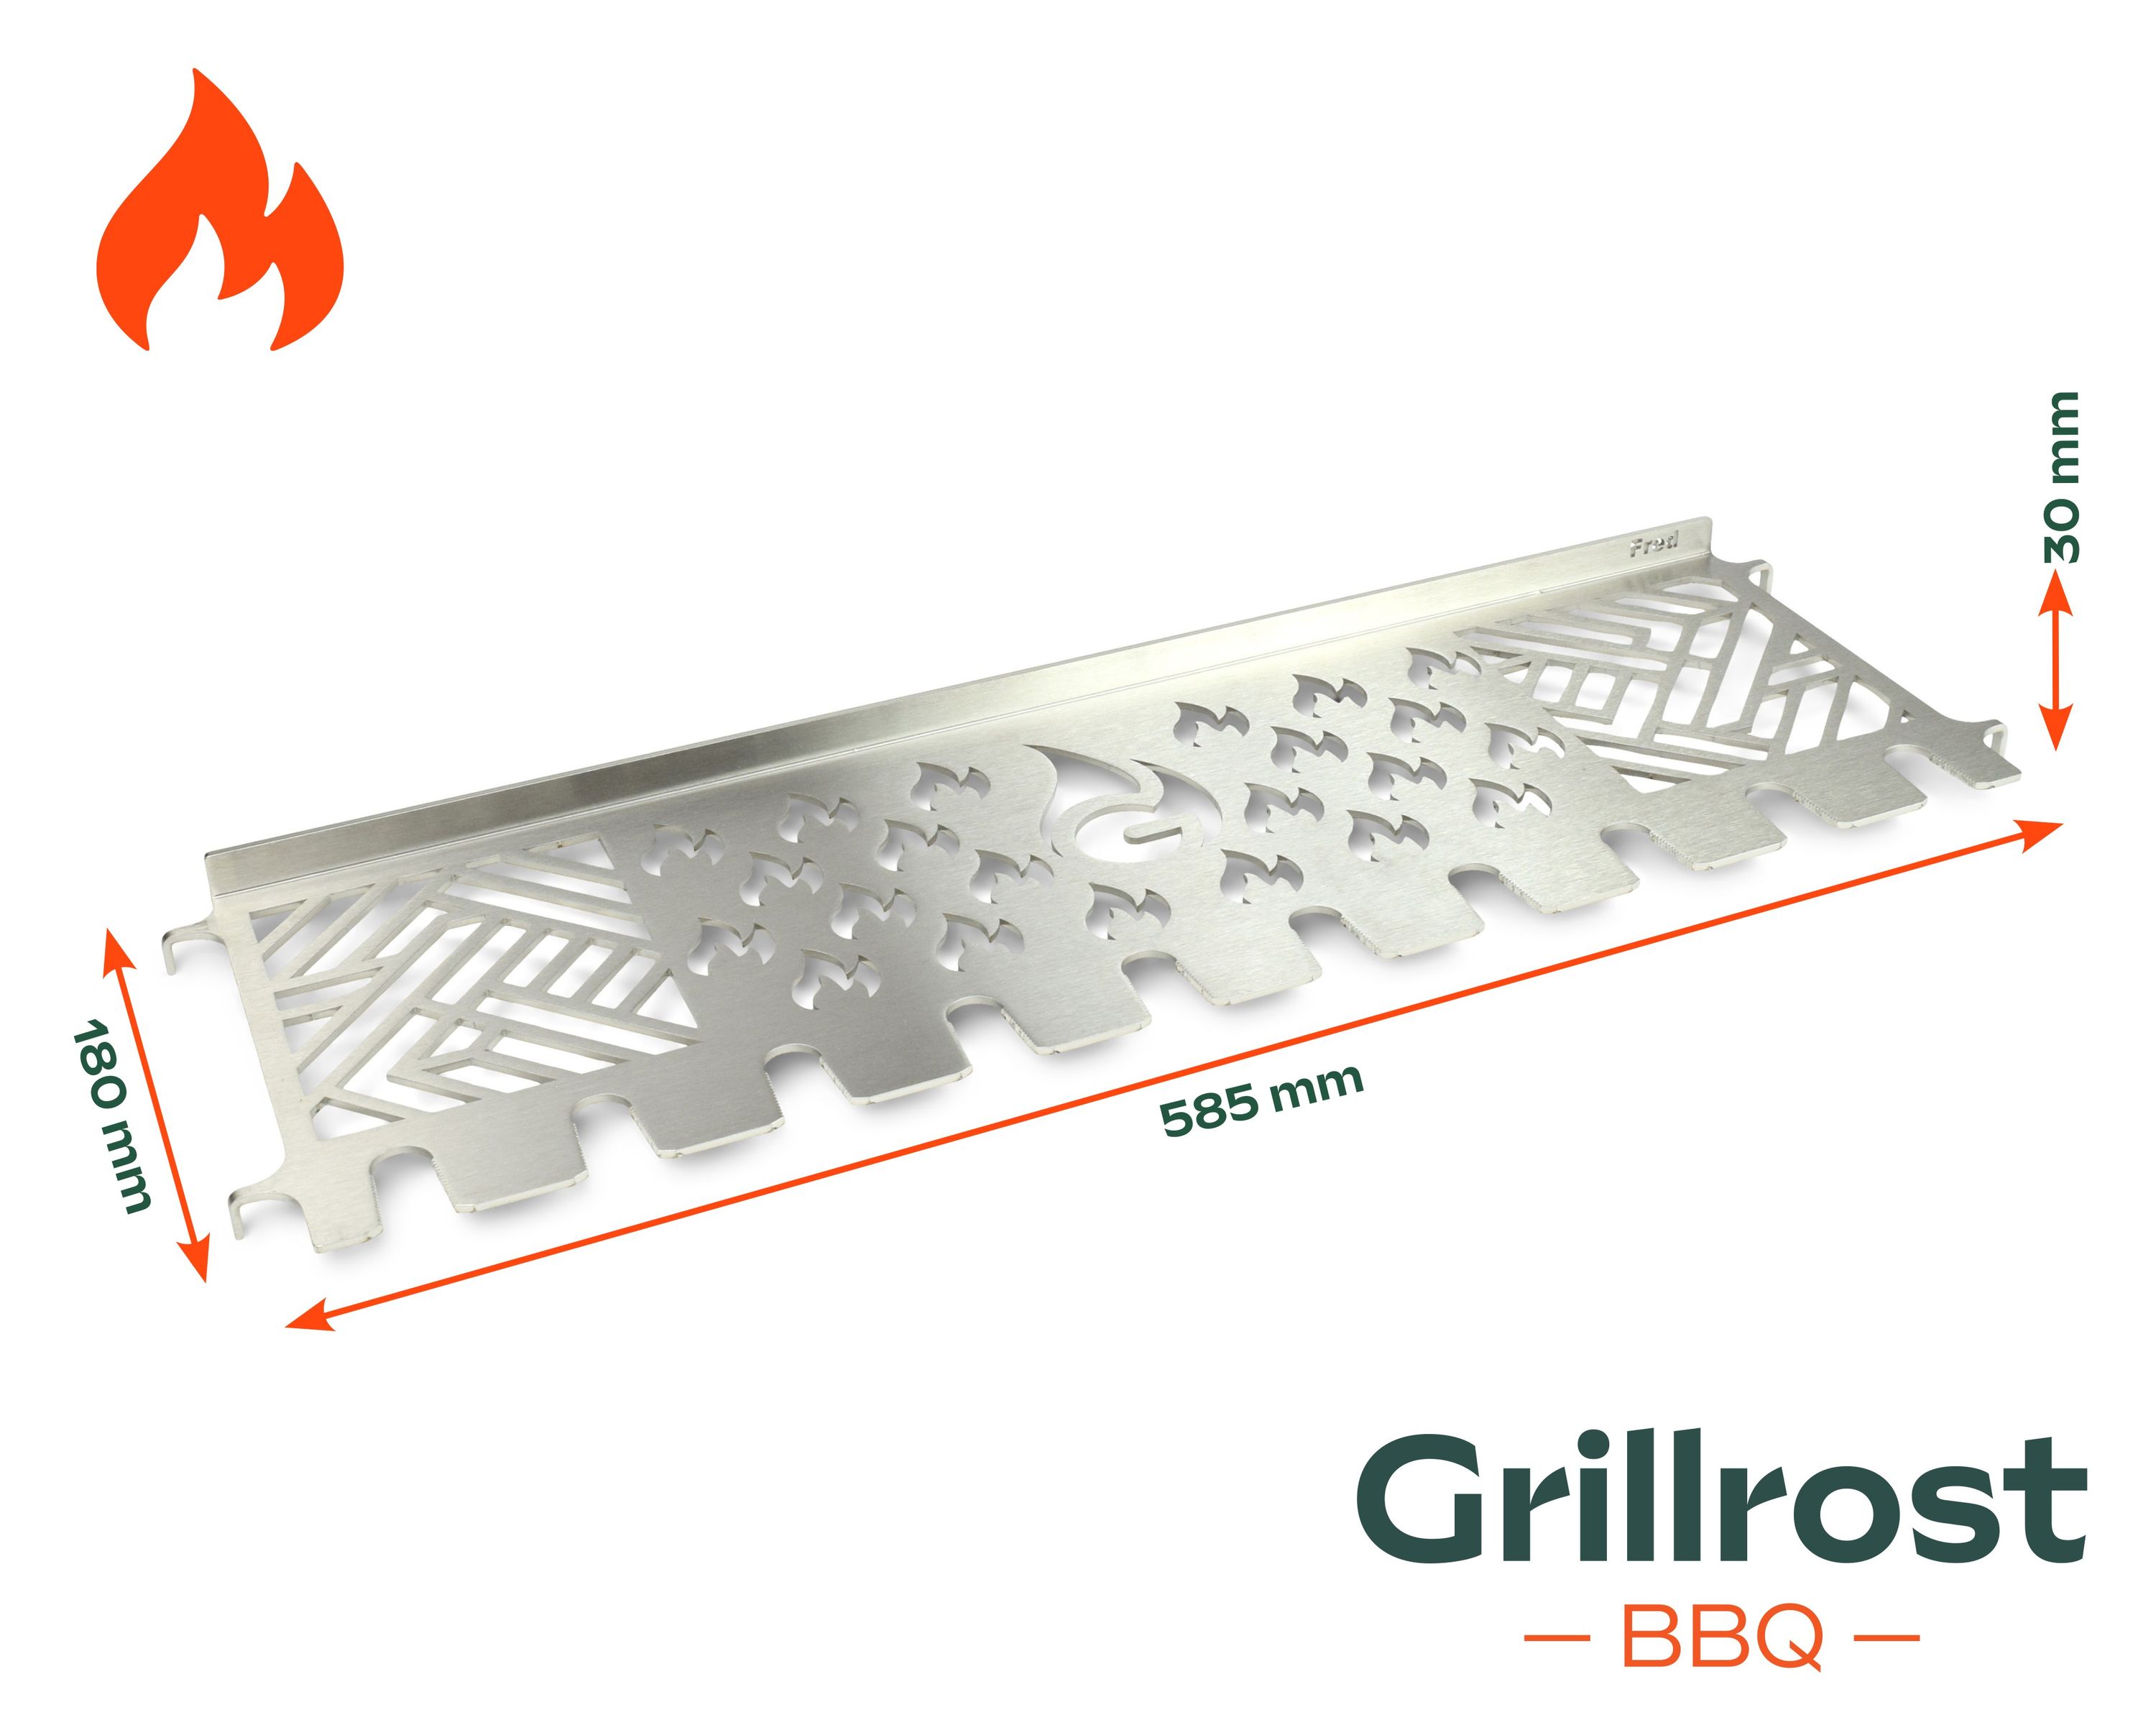 Stainless steel MultiStation for Burnhard Fred - Hot grate